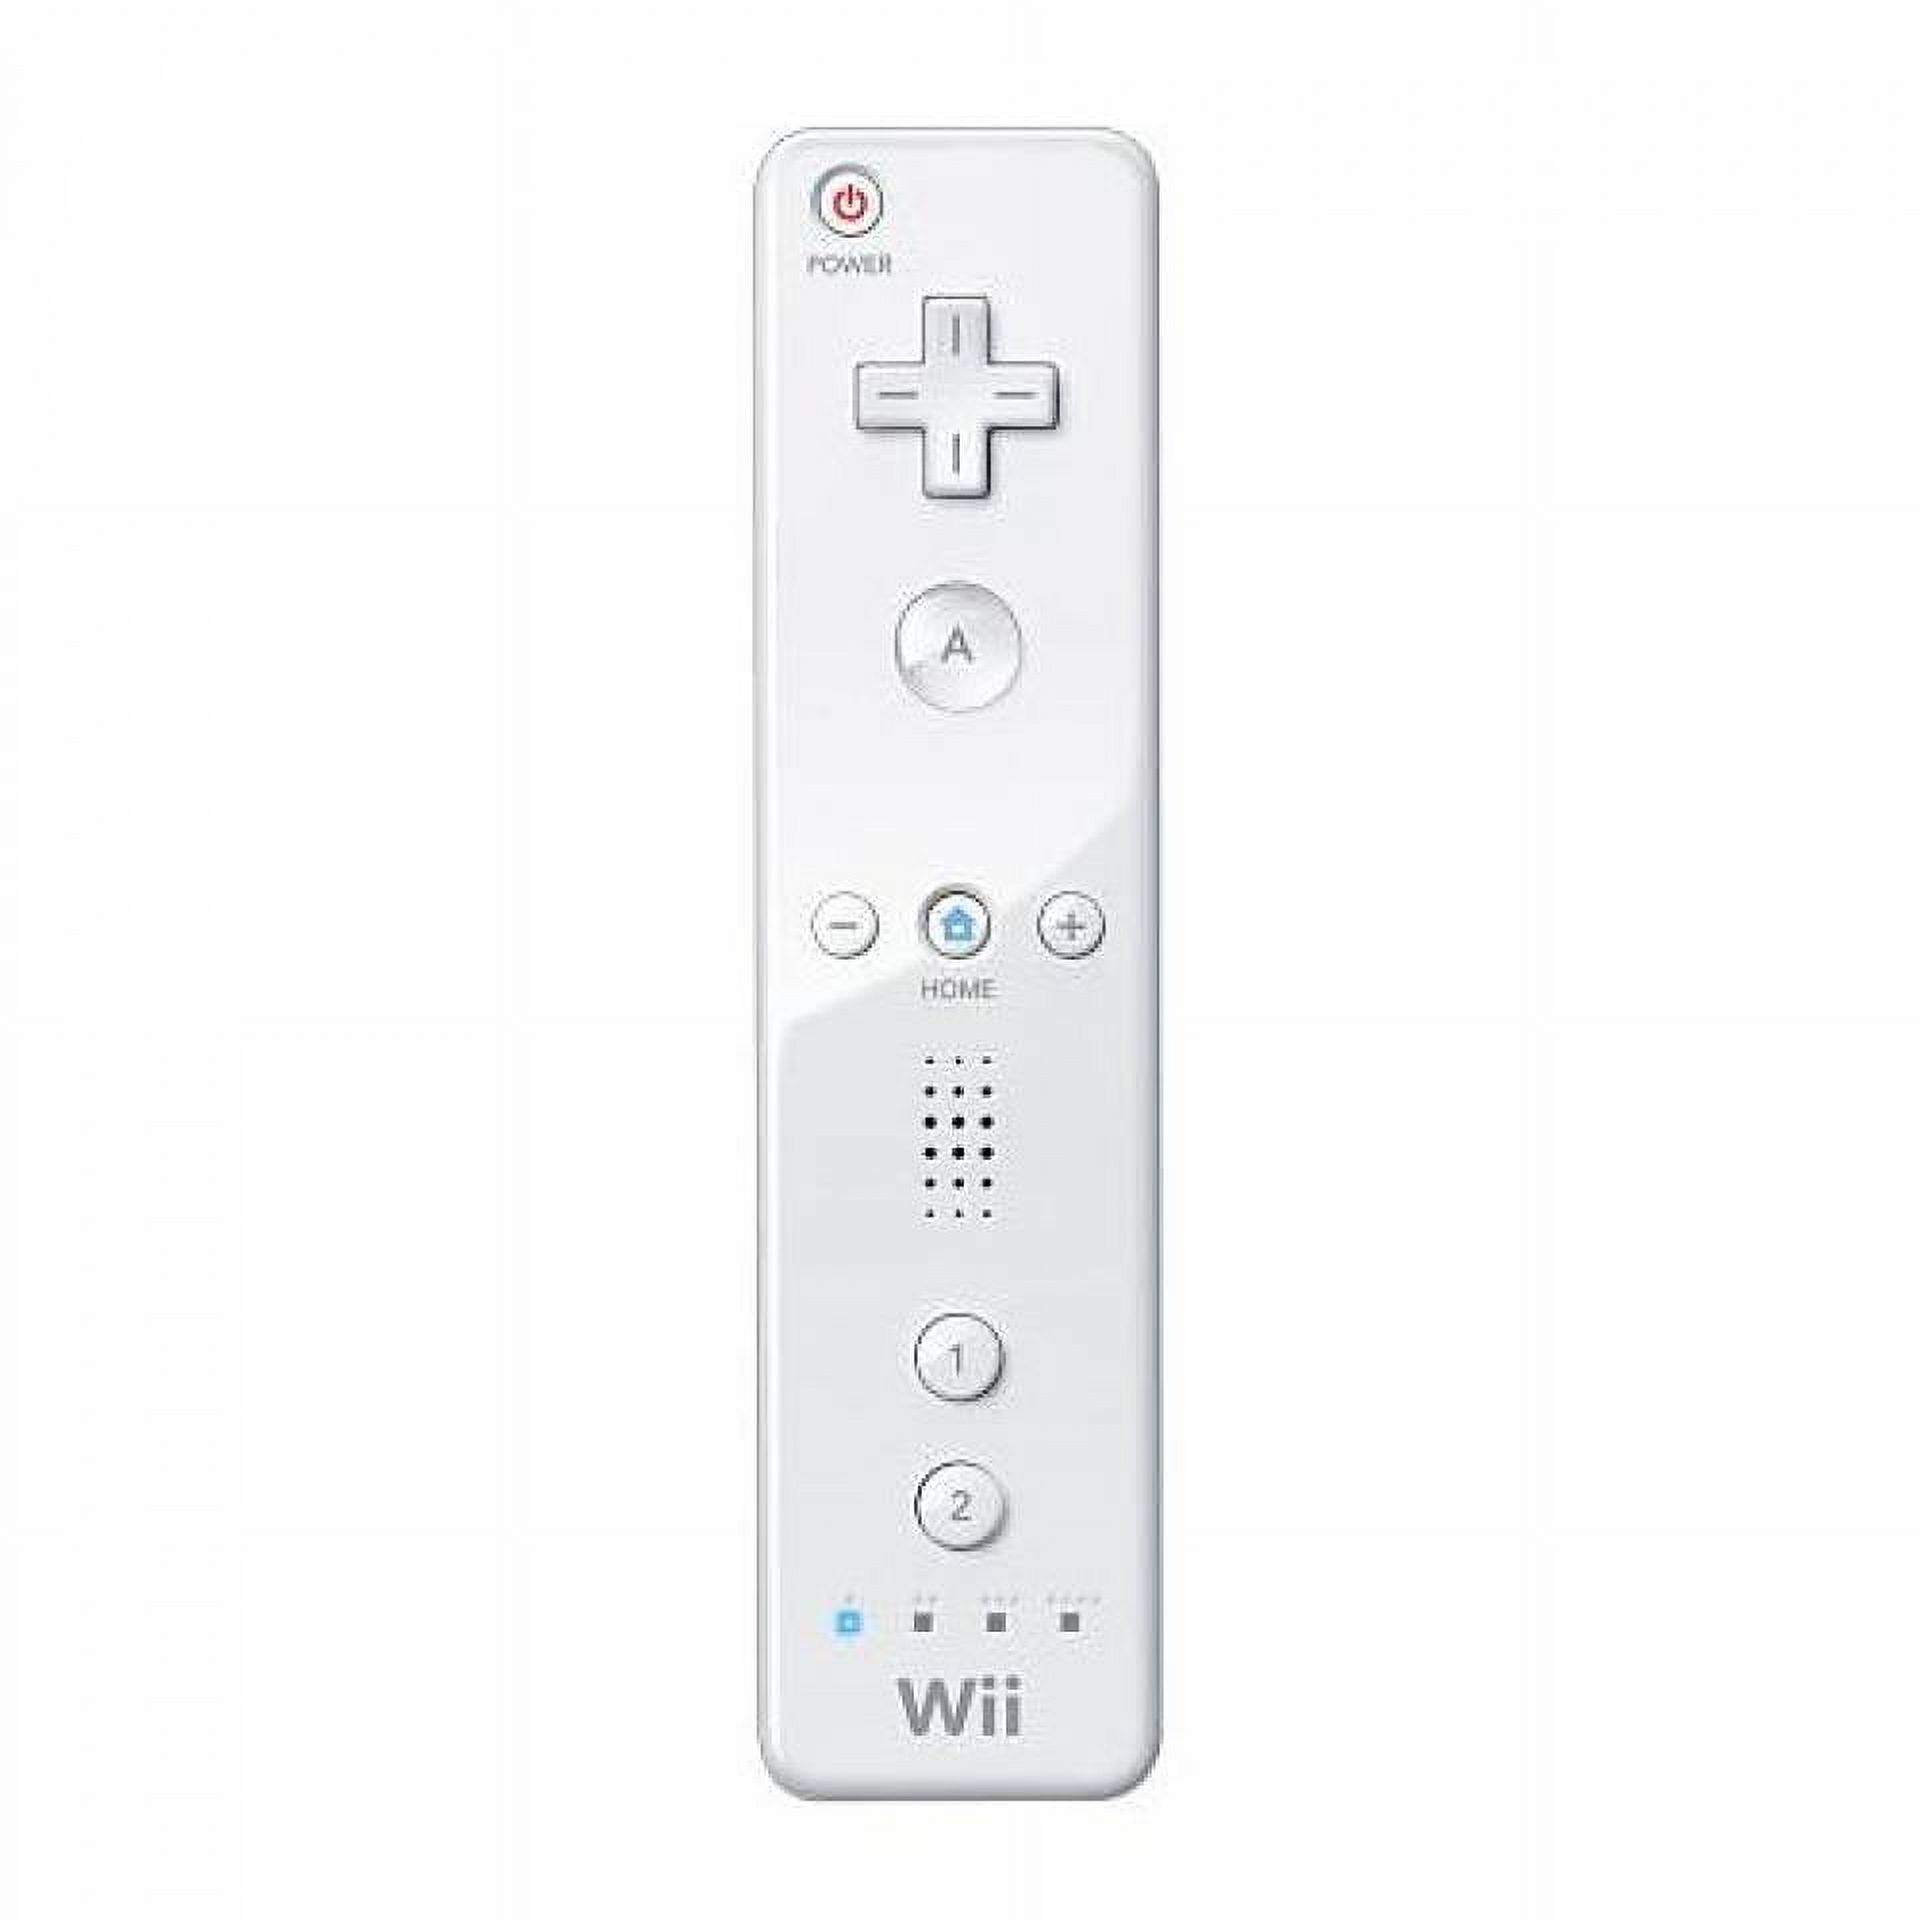 Restored Nintendo Wii Video Game Console (White) Matching Remote and Nunchuk Controllers (Refurbished) - image 4 of 4